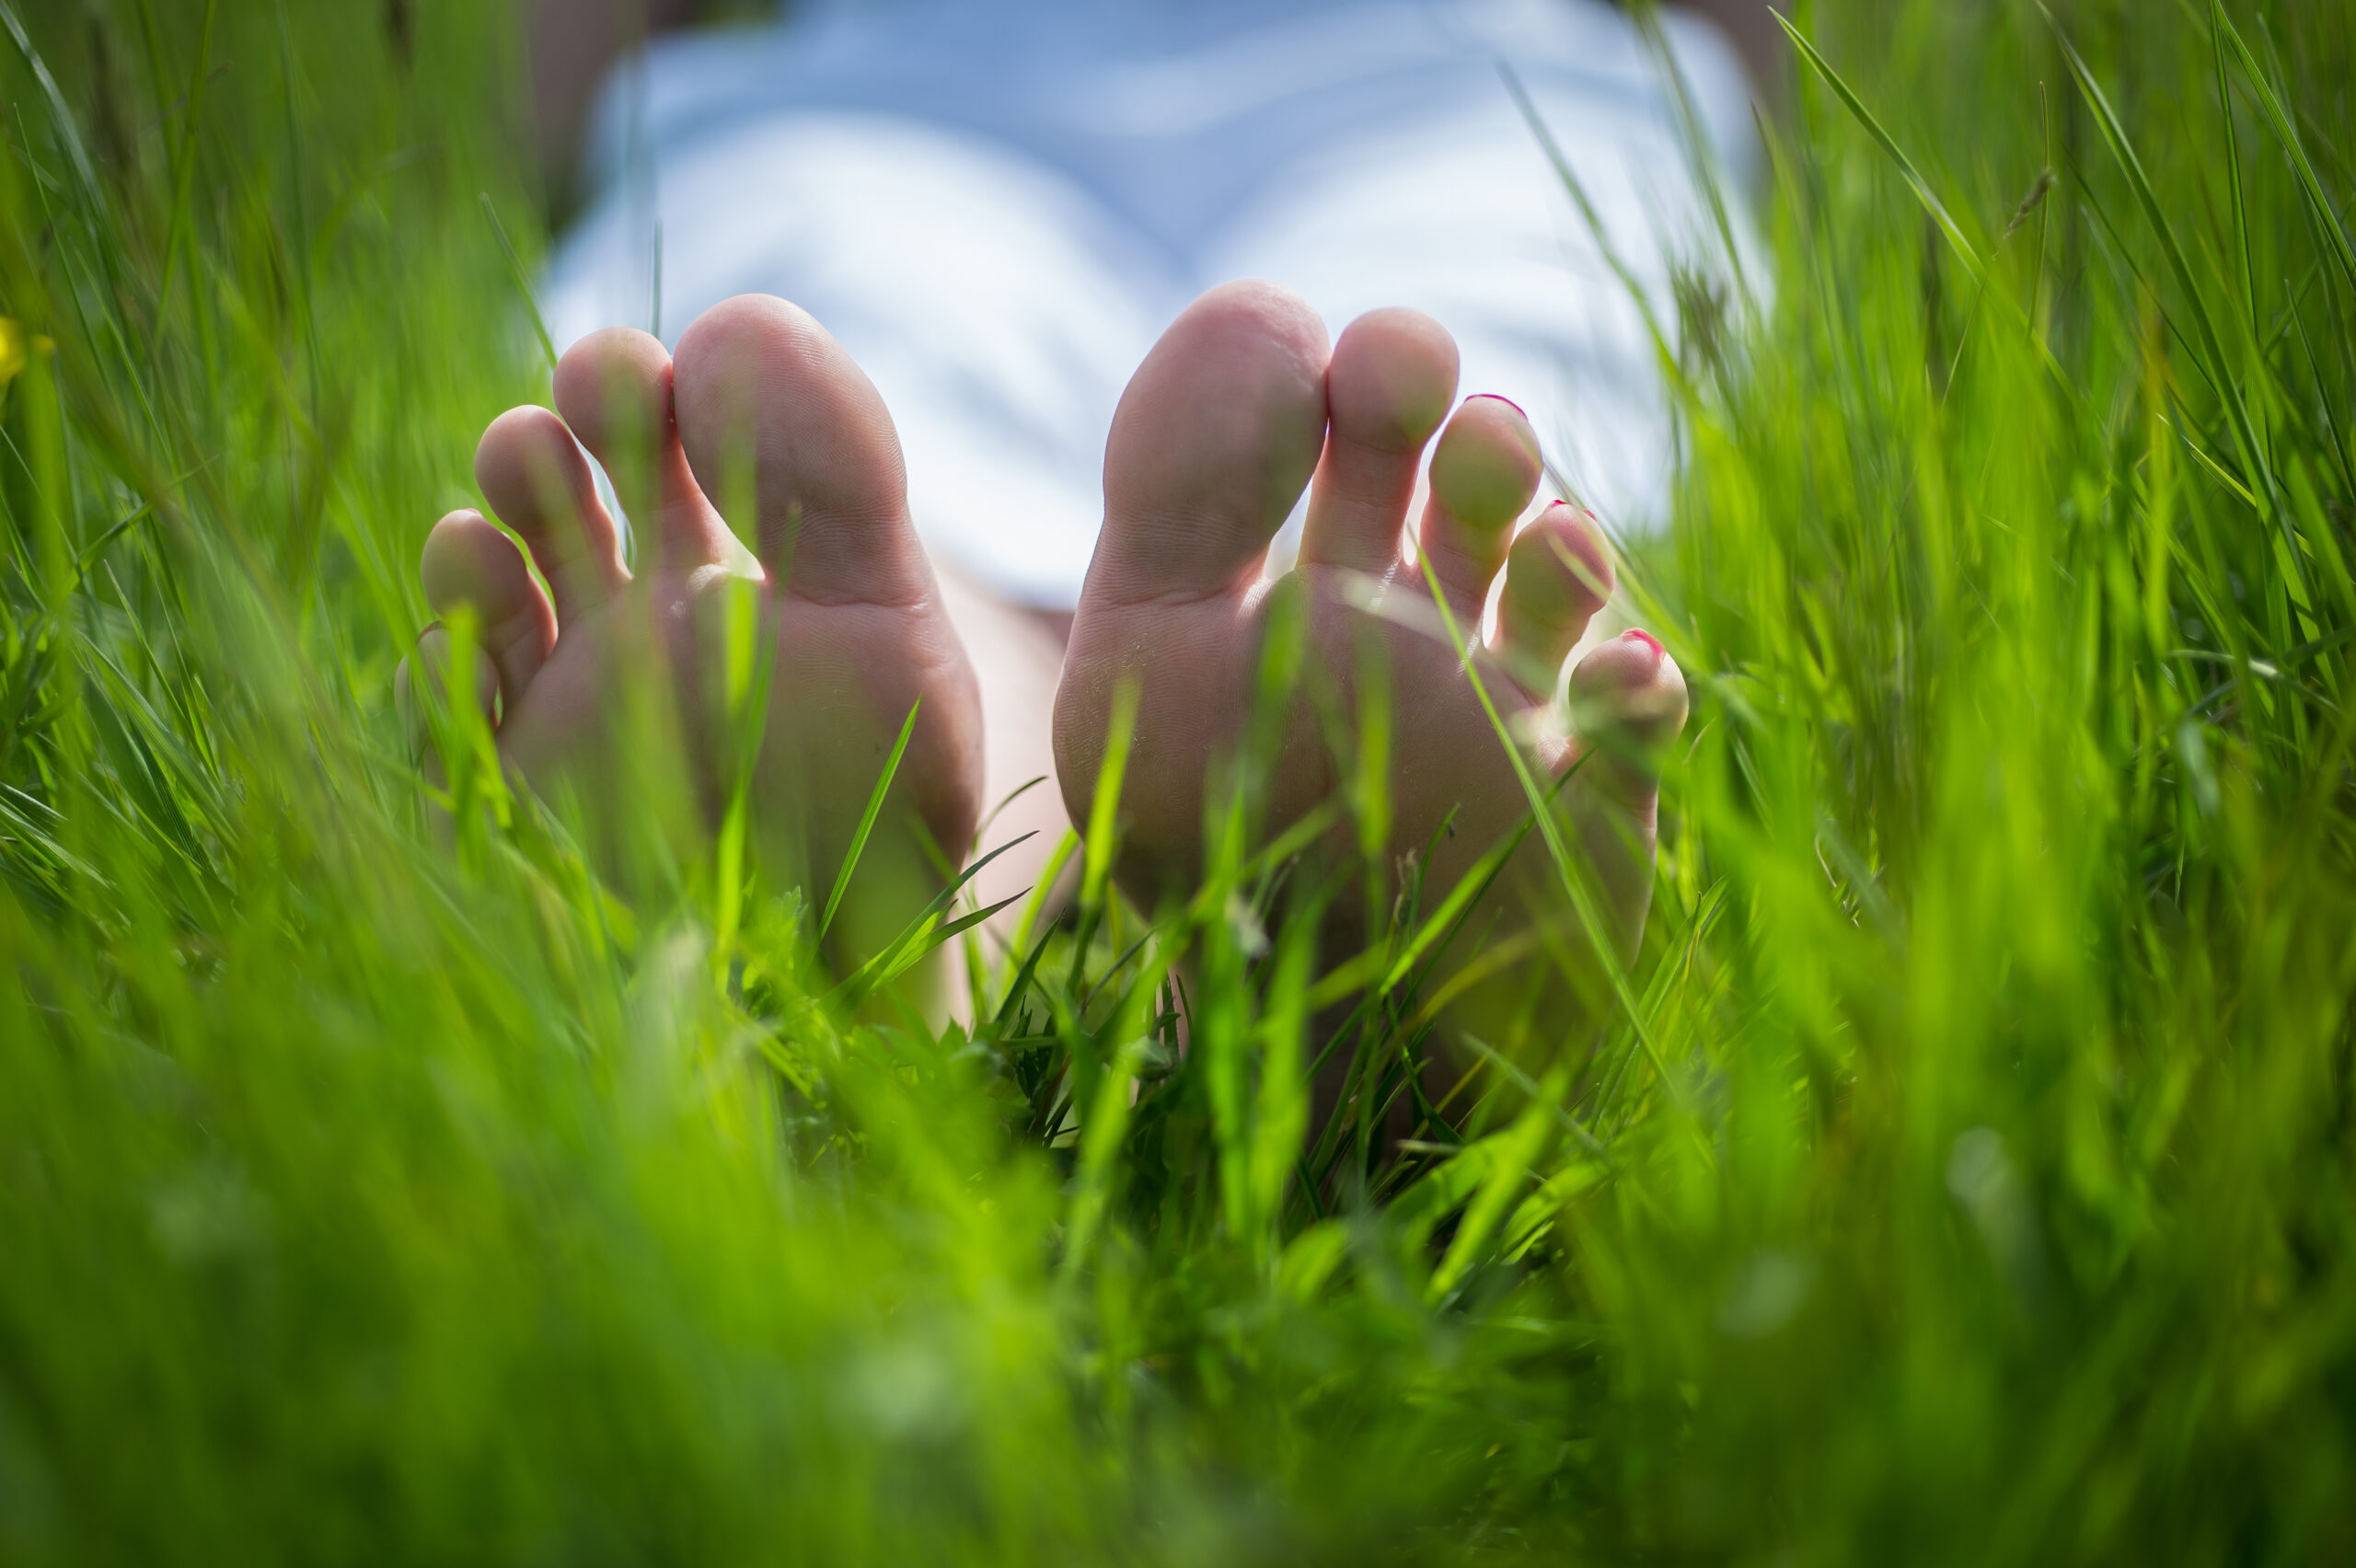 Barefoot In The Grass C Matthew Roberts Scaled 